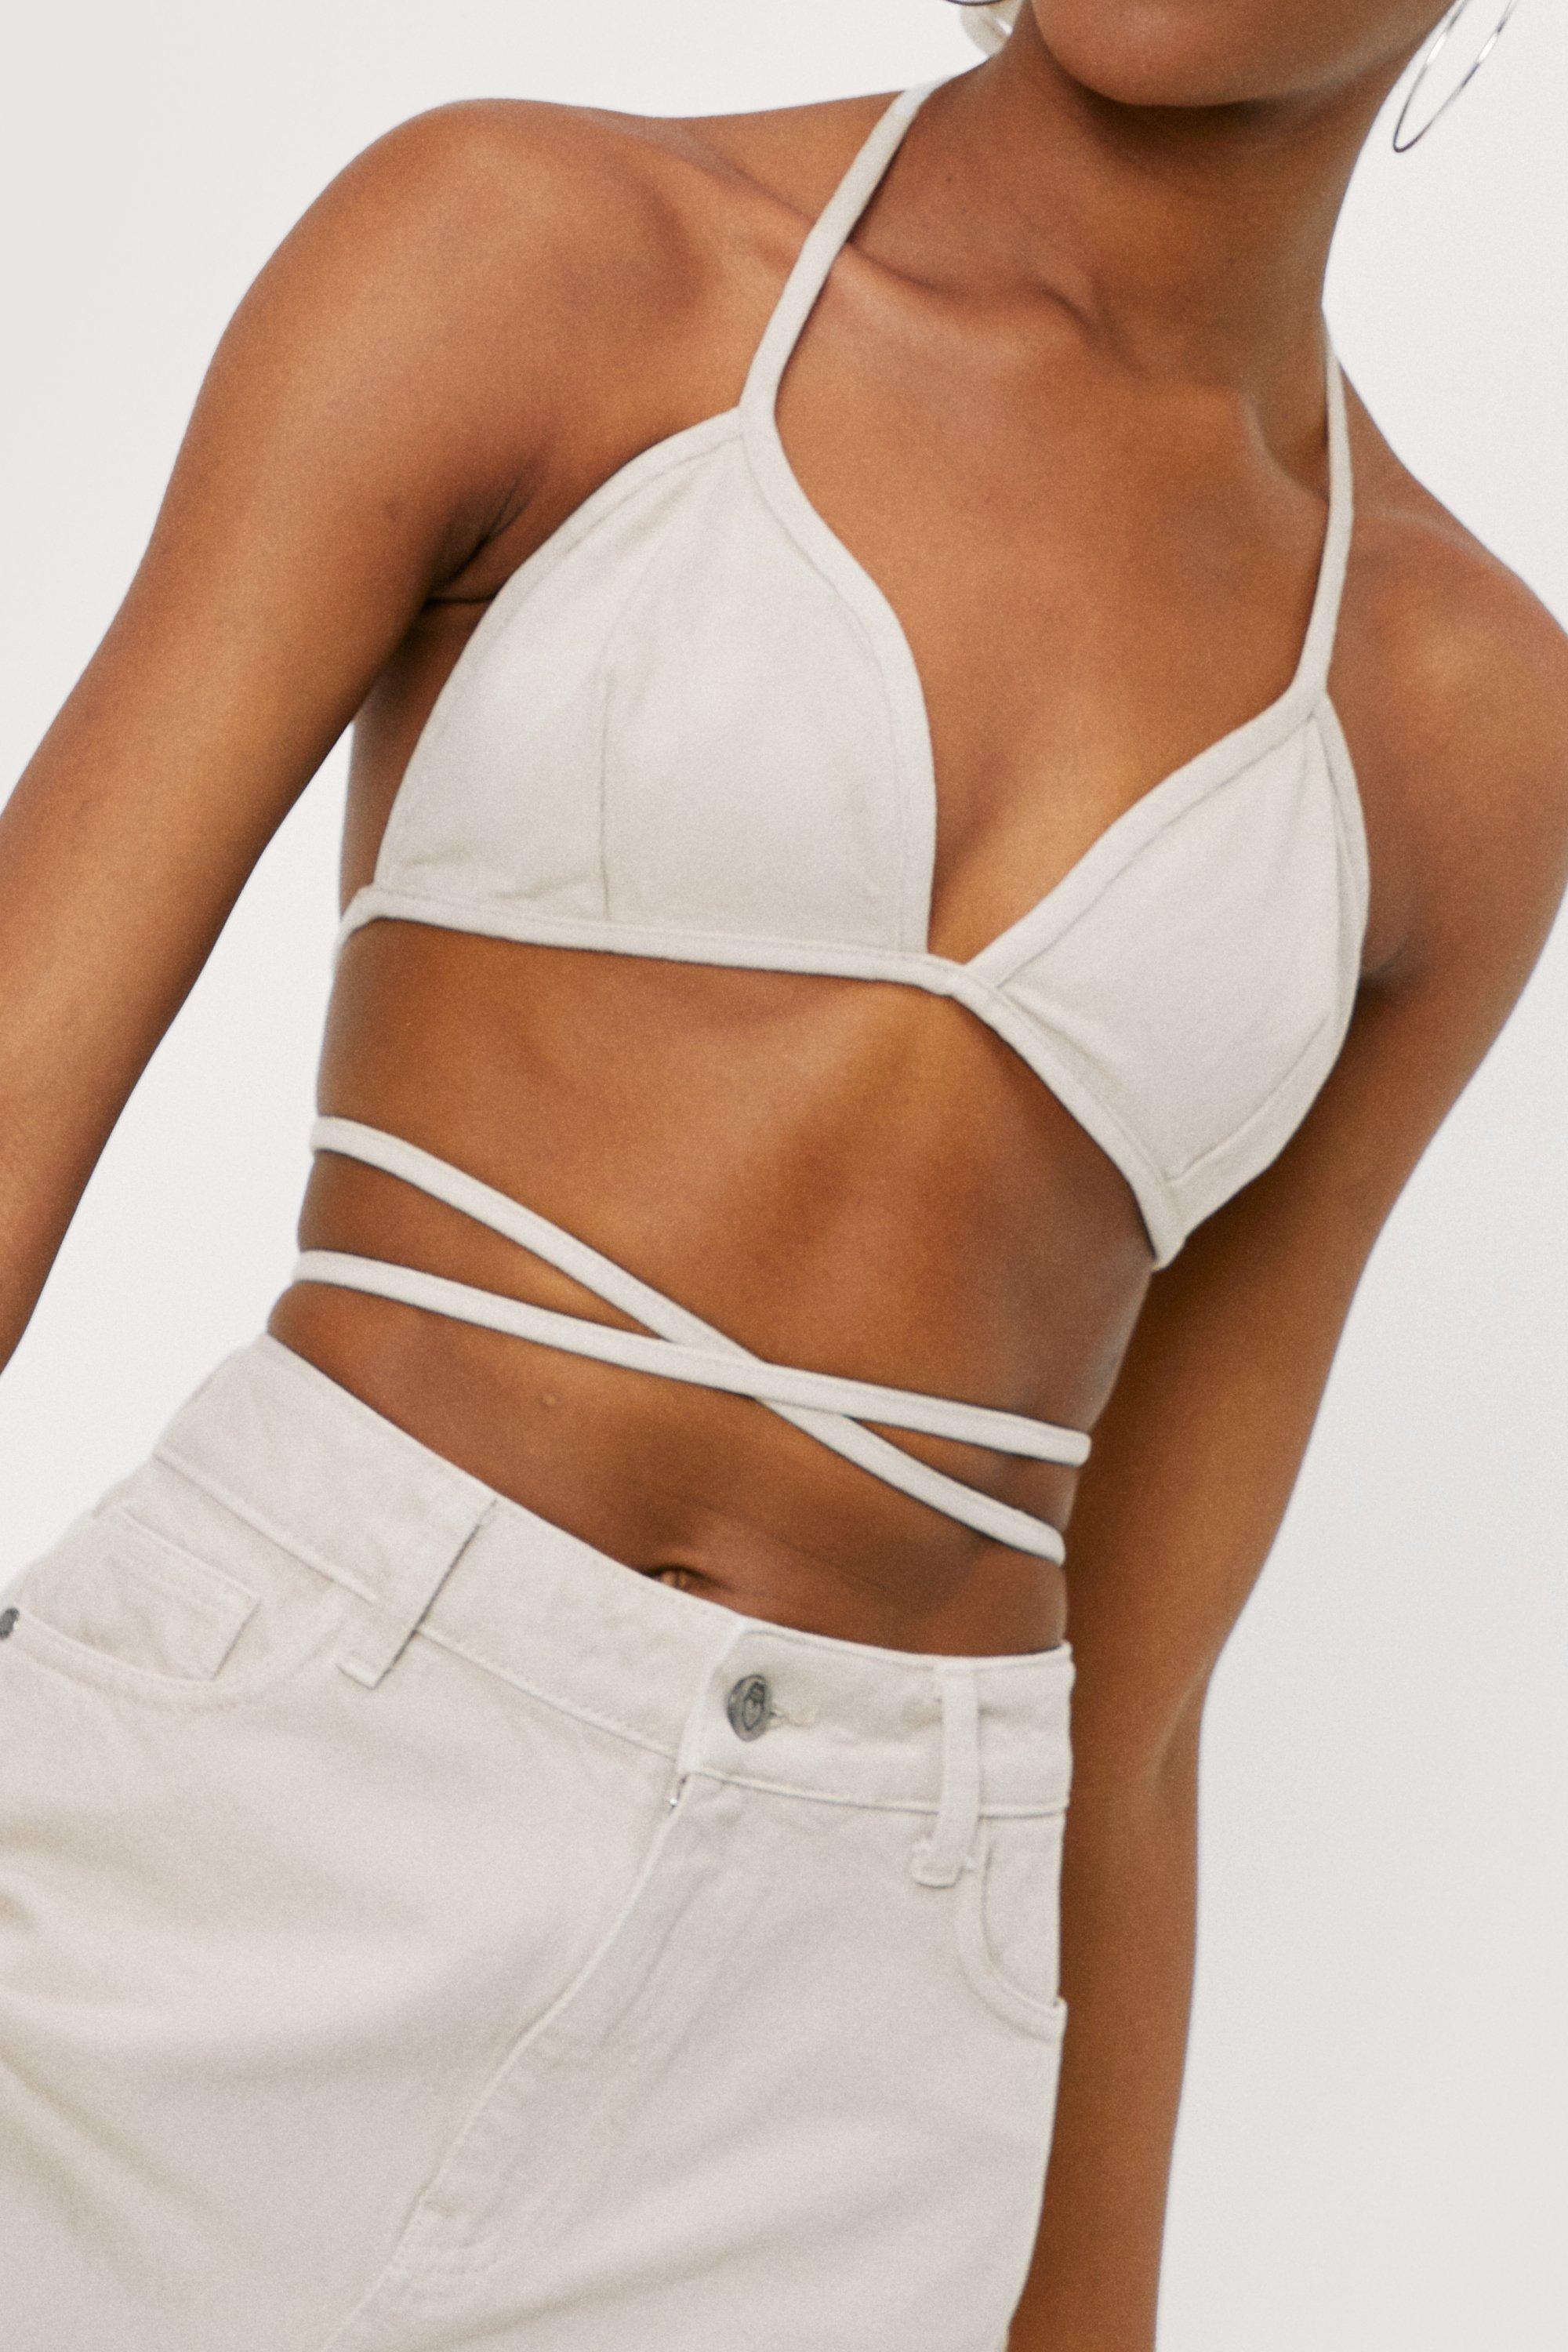 By Anthropologie Seamless Eyelet Tie-Front Bralette